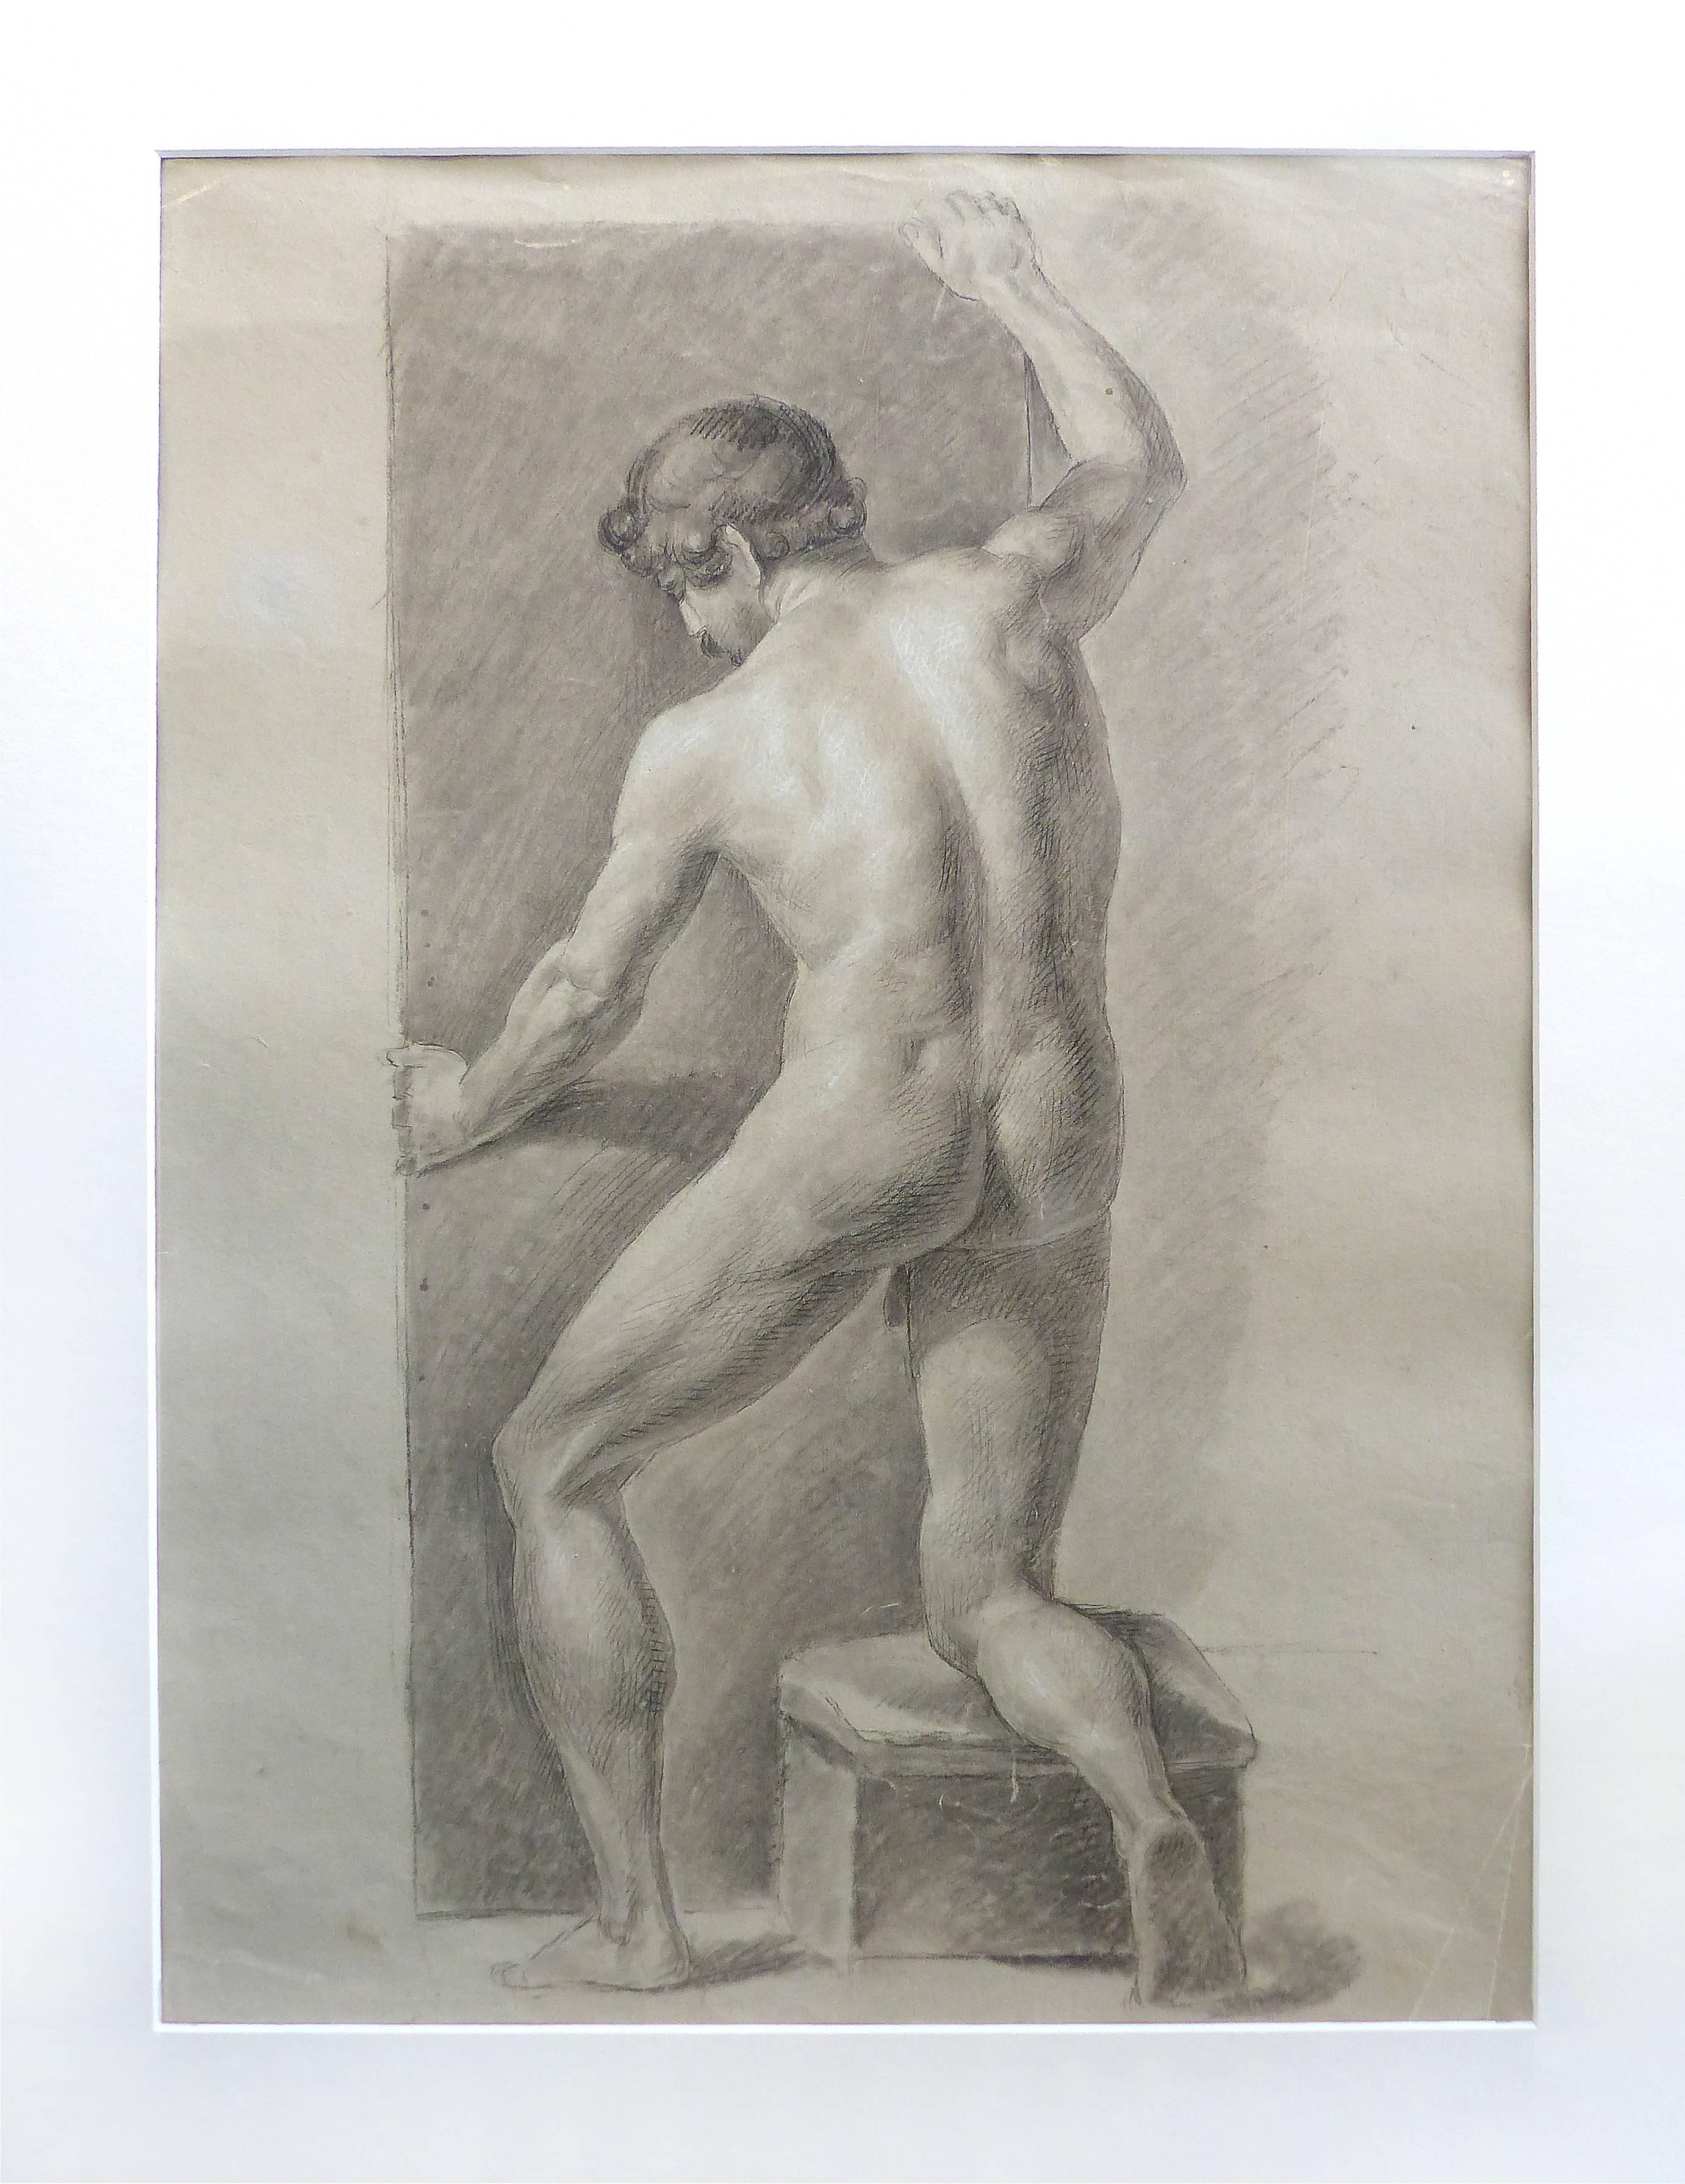 Late 18th Century Graphite and Pastel Drawing of a Male Nude Artist Study

Offered for sale is an 18th century graphite and pastel drawing on paper of a standing male nude artist study. The drawing is loose and is unsigned. The drawing shows age